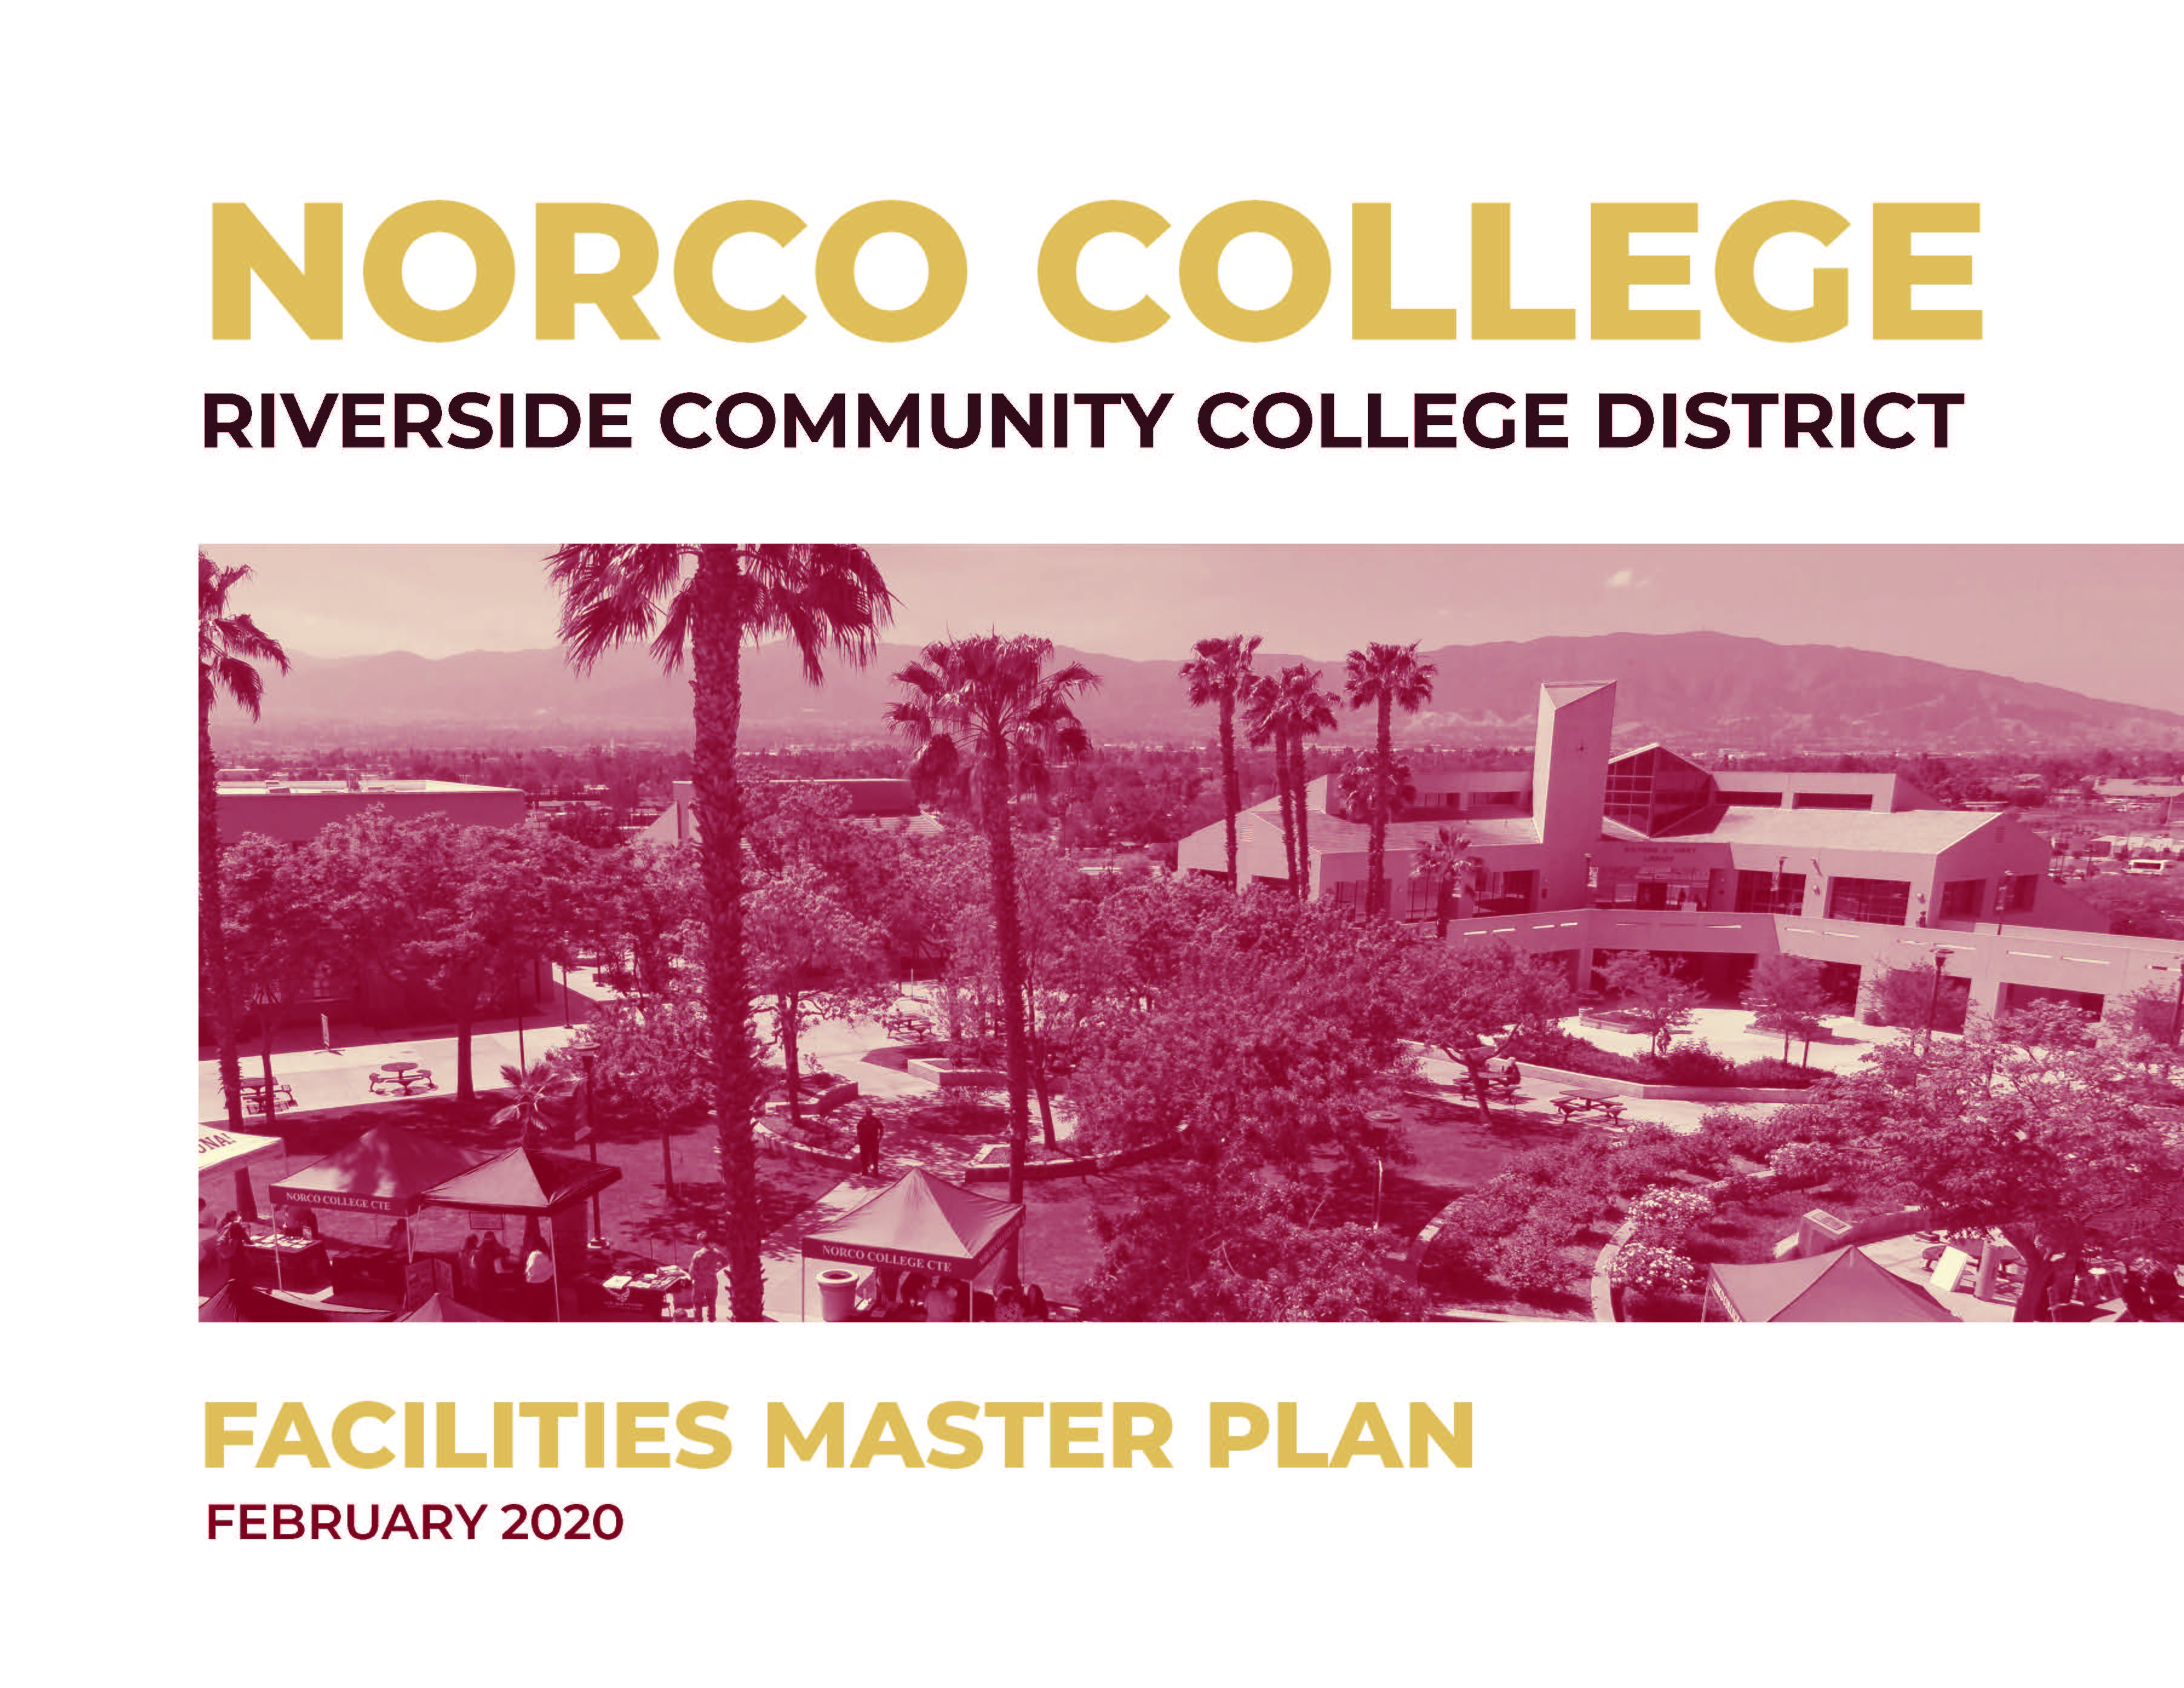 Norco College Facilities Master Plan - February 2020